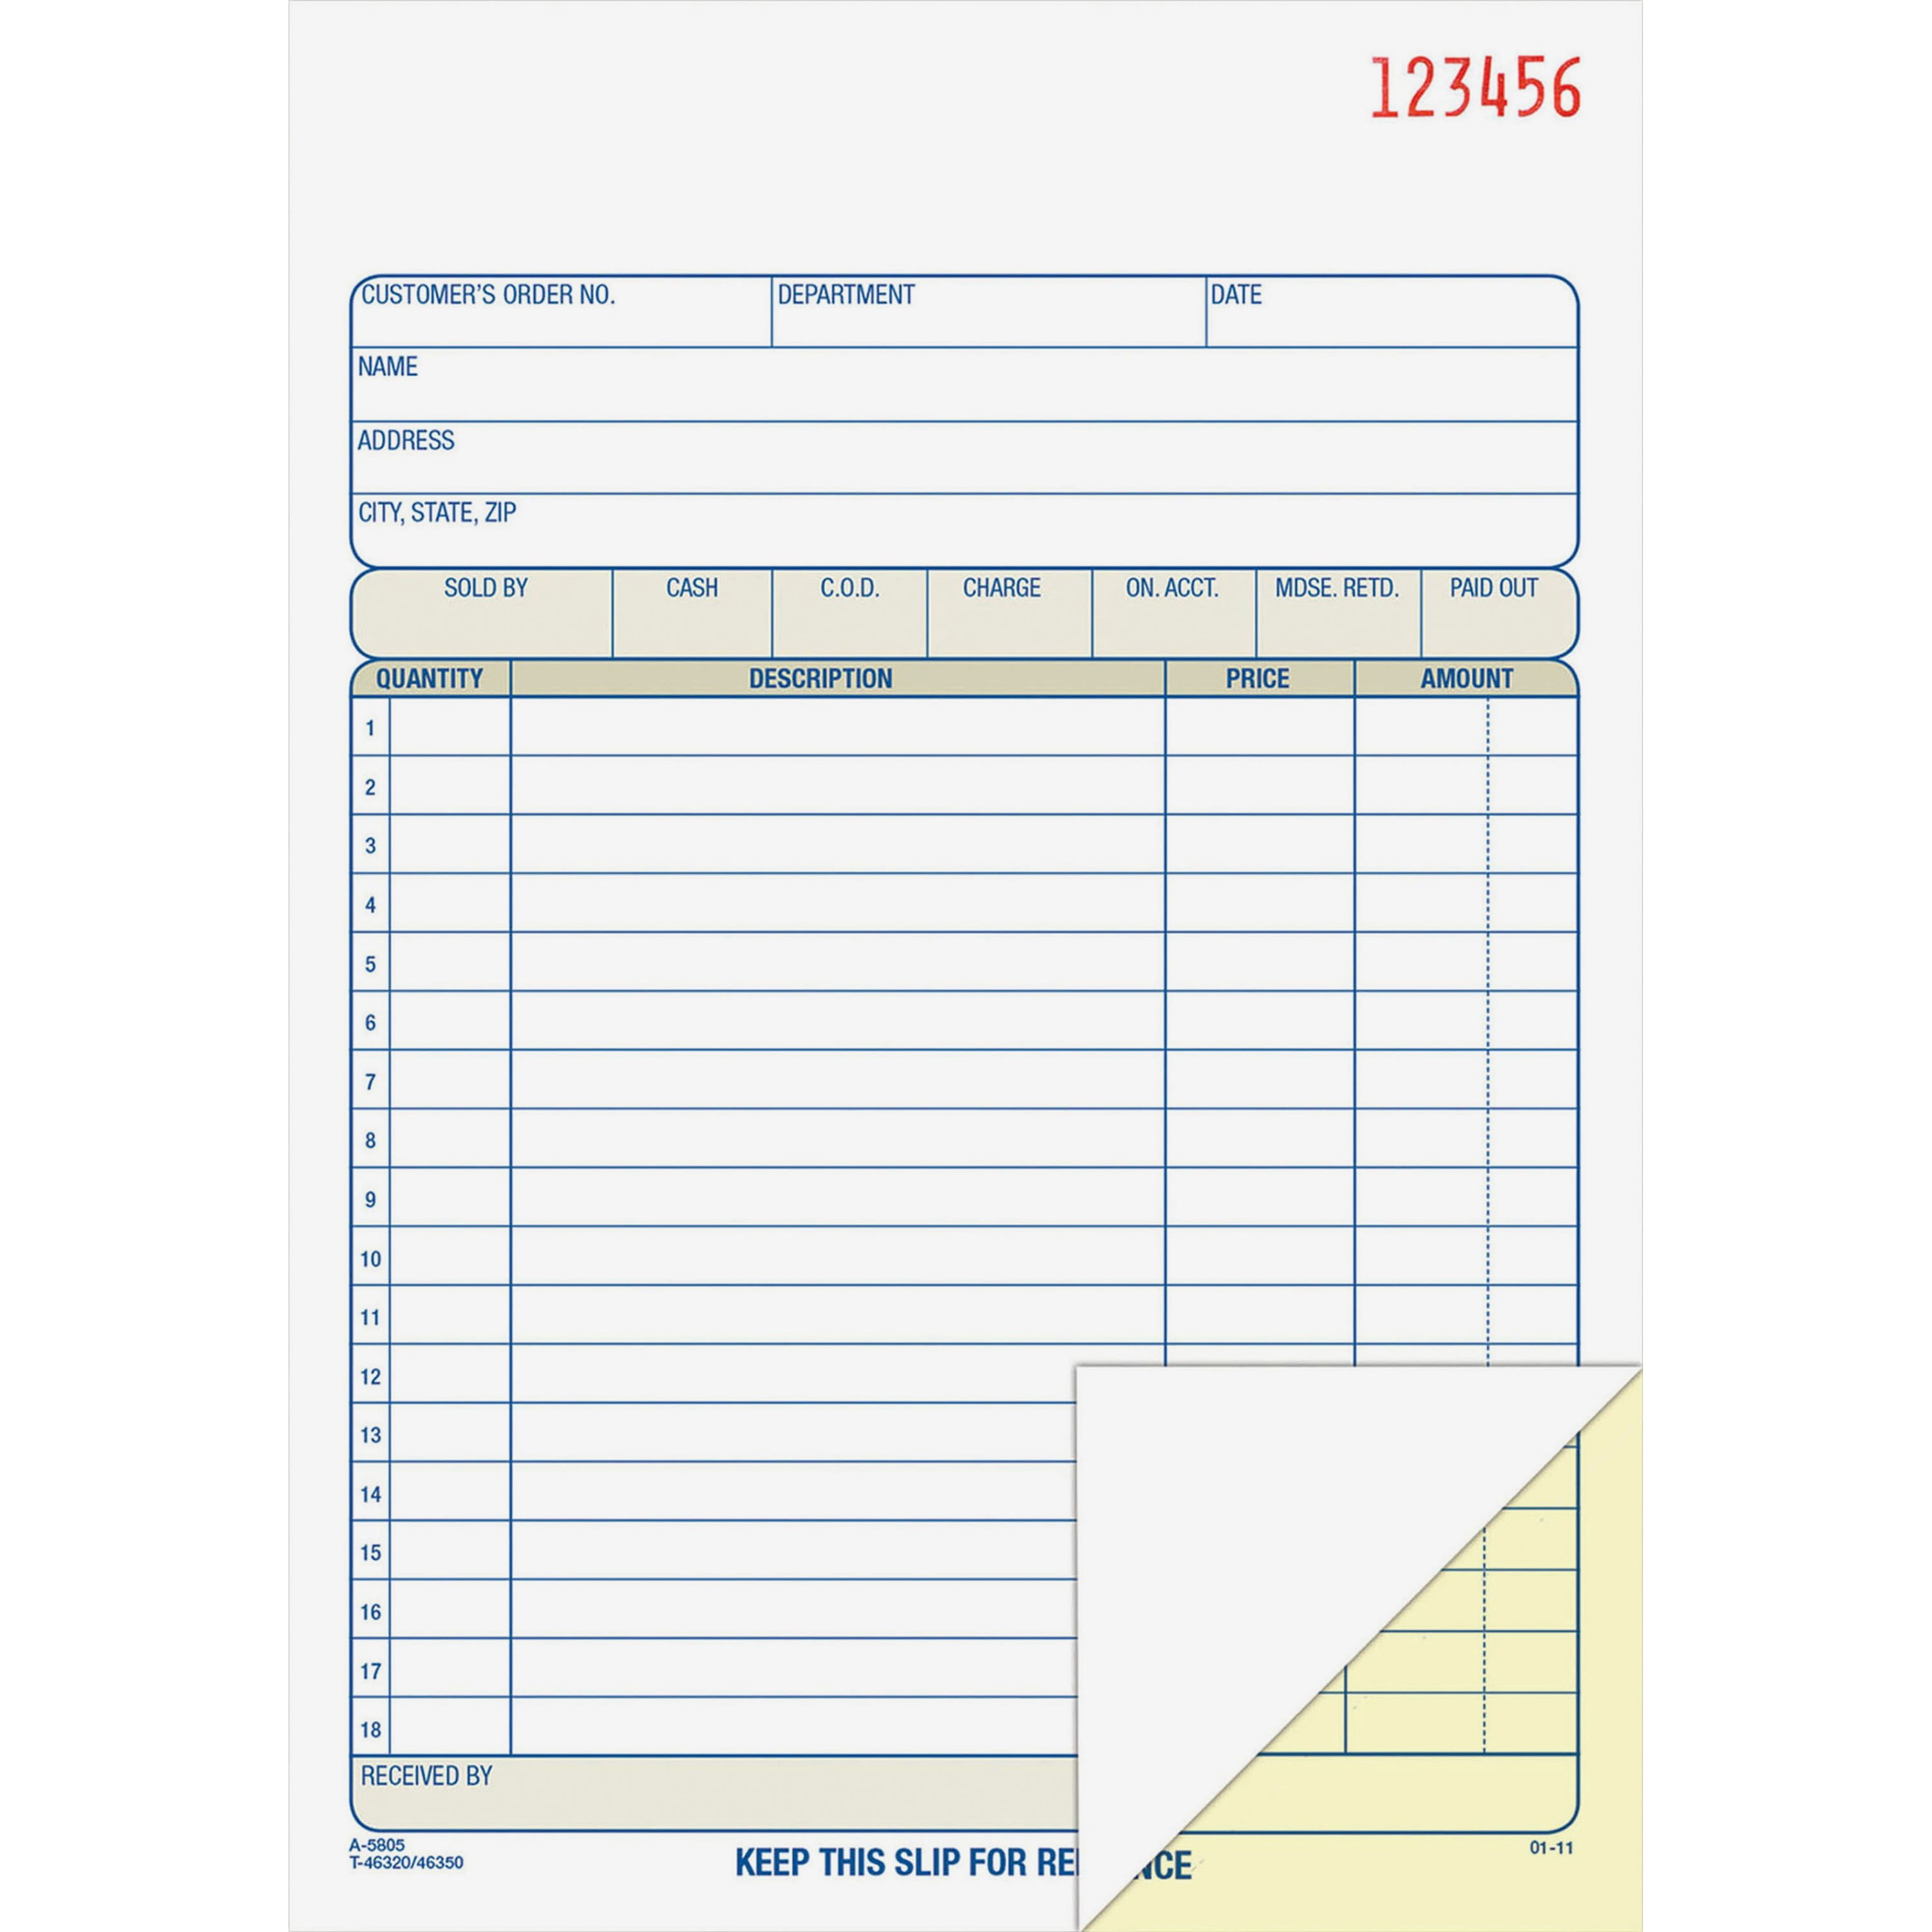 50X-Sales Order Book Receipt Invoice Duplicate 50 sets Forms 5.75" X 8.50" USA 